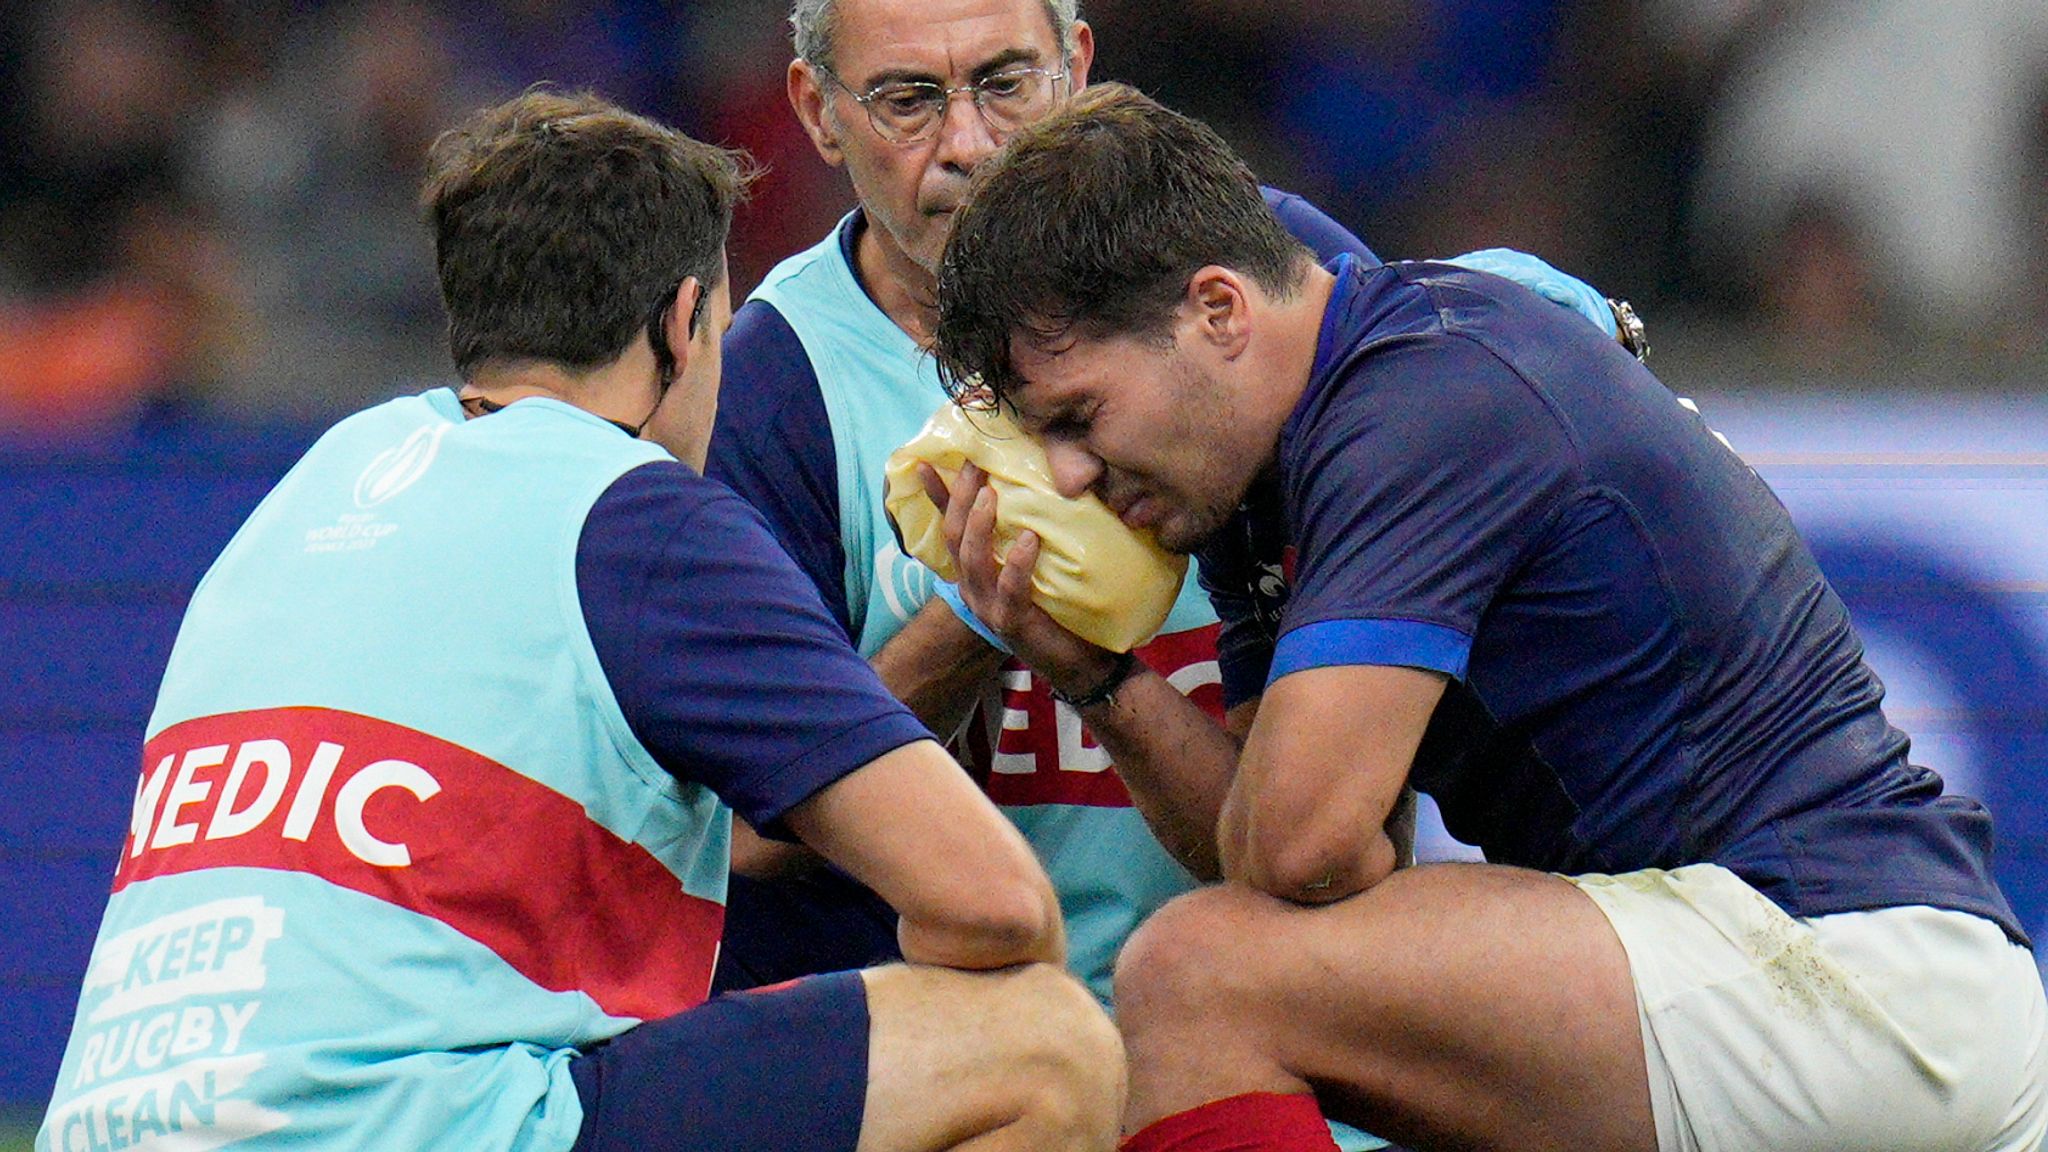 Rugby World Cup Antoine Dupont cleared to resume training by surgeon ahead of France vs South Africa quarter-final Rugby Union News Sky Sports